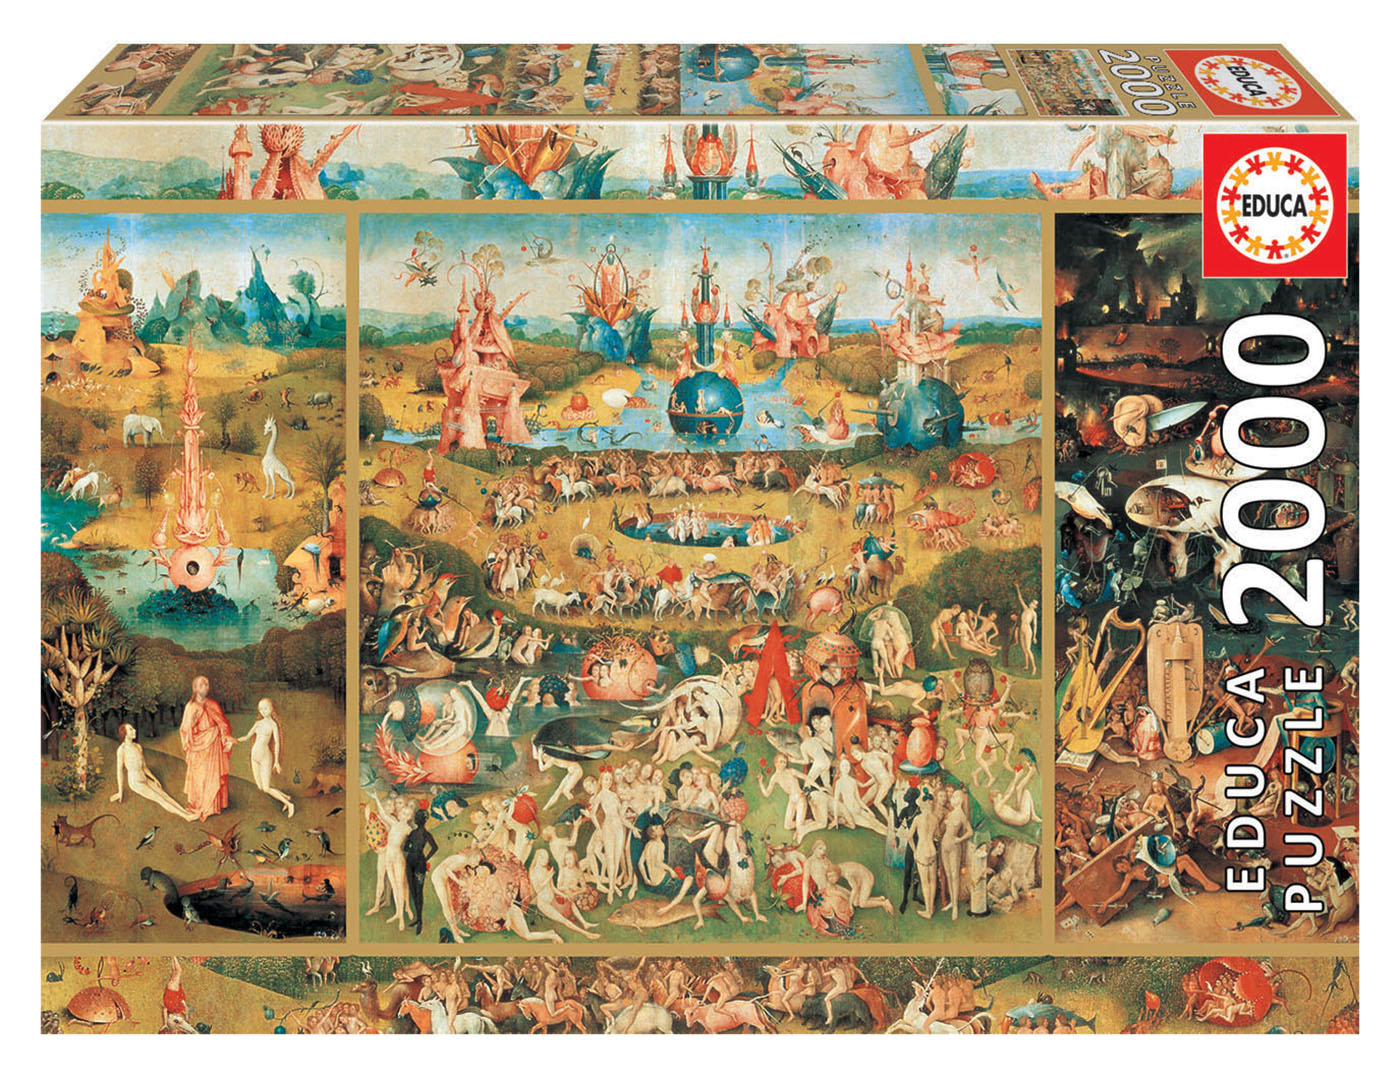 2000 The Garden of Earthly Delights